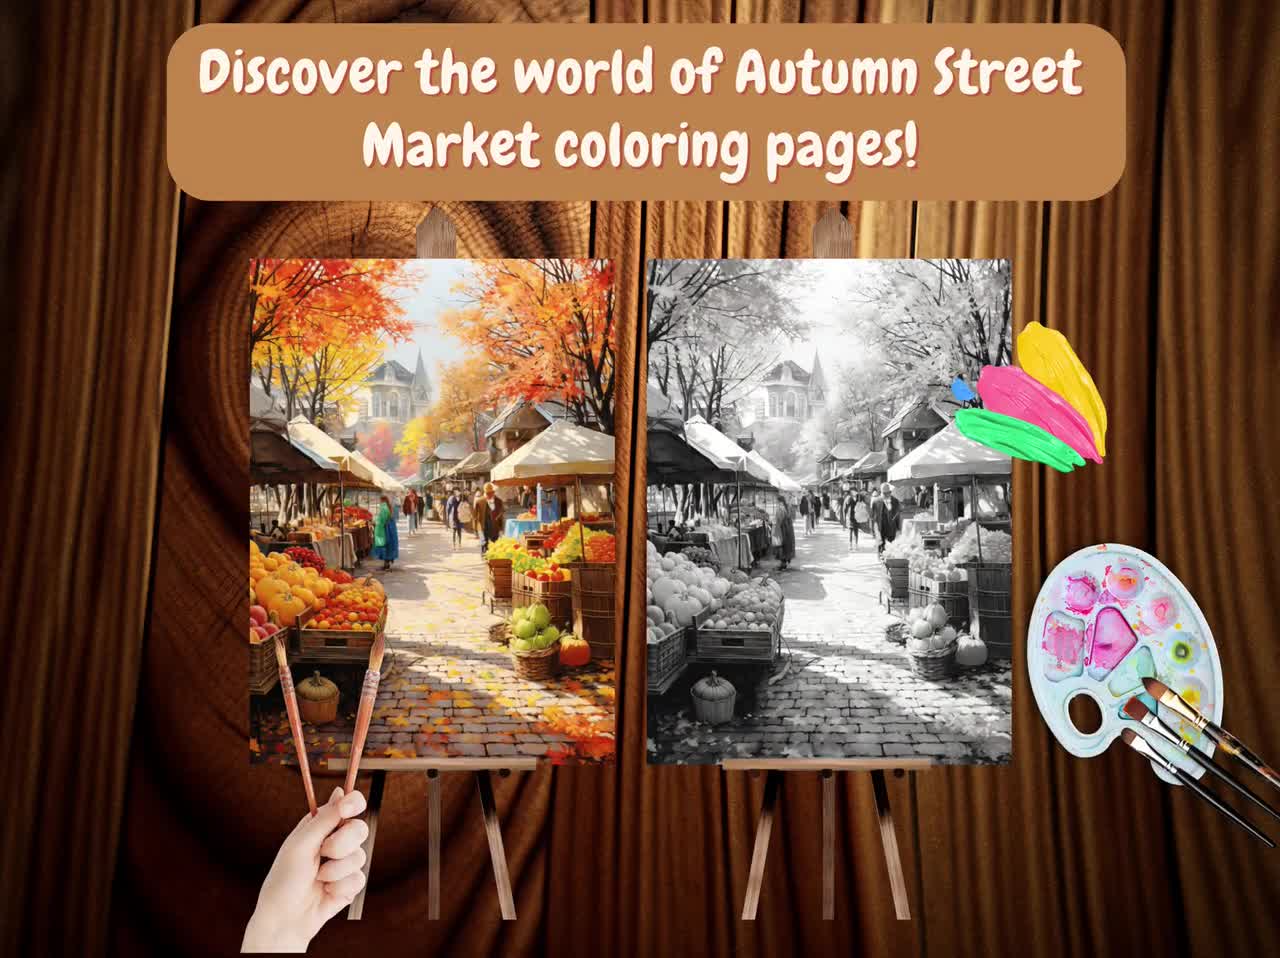 Autumn Street Markets Grayscale Coloring Pages for Adults, Printable PDF  File Instant Download